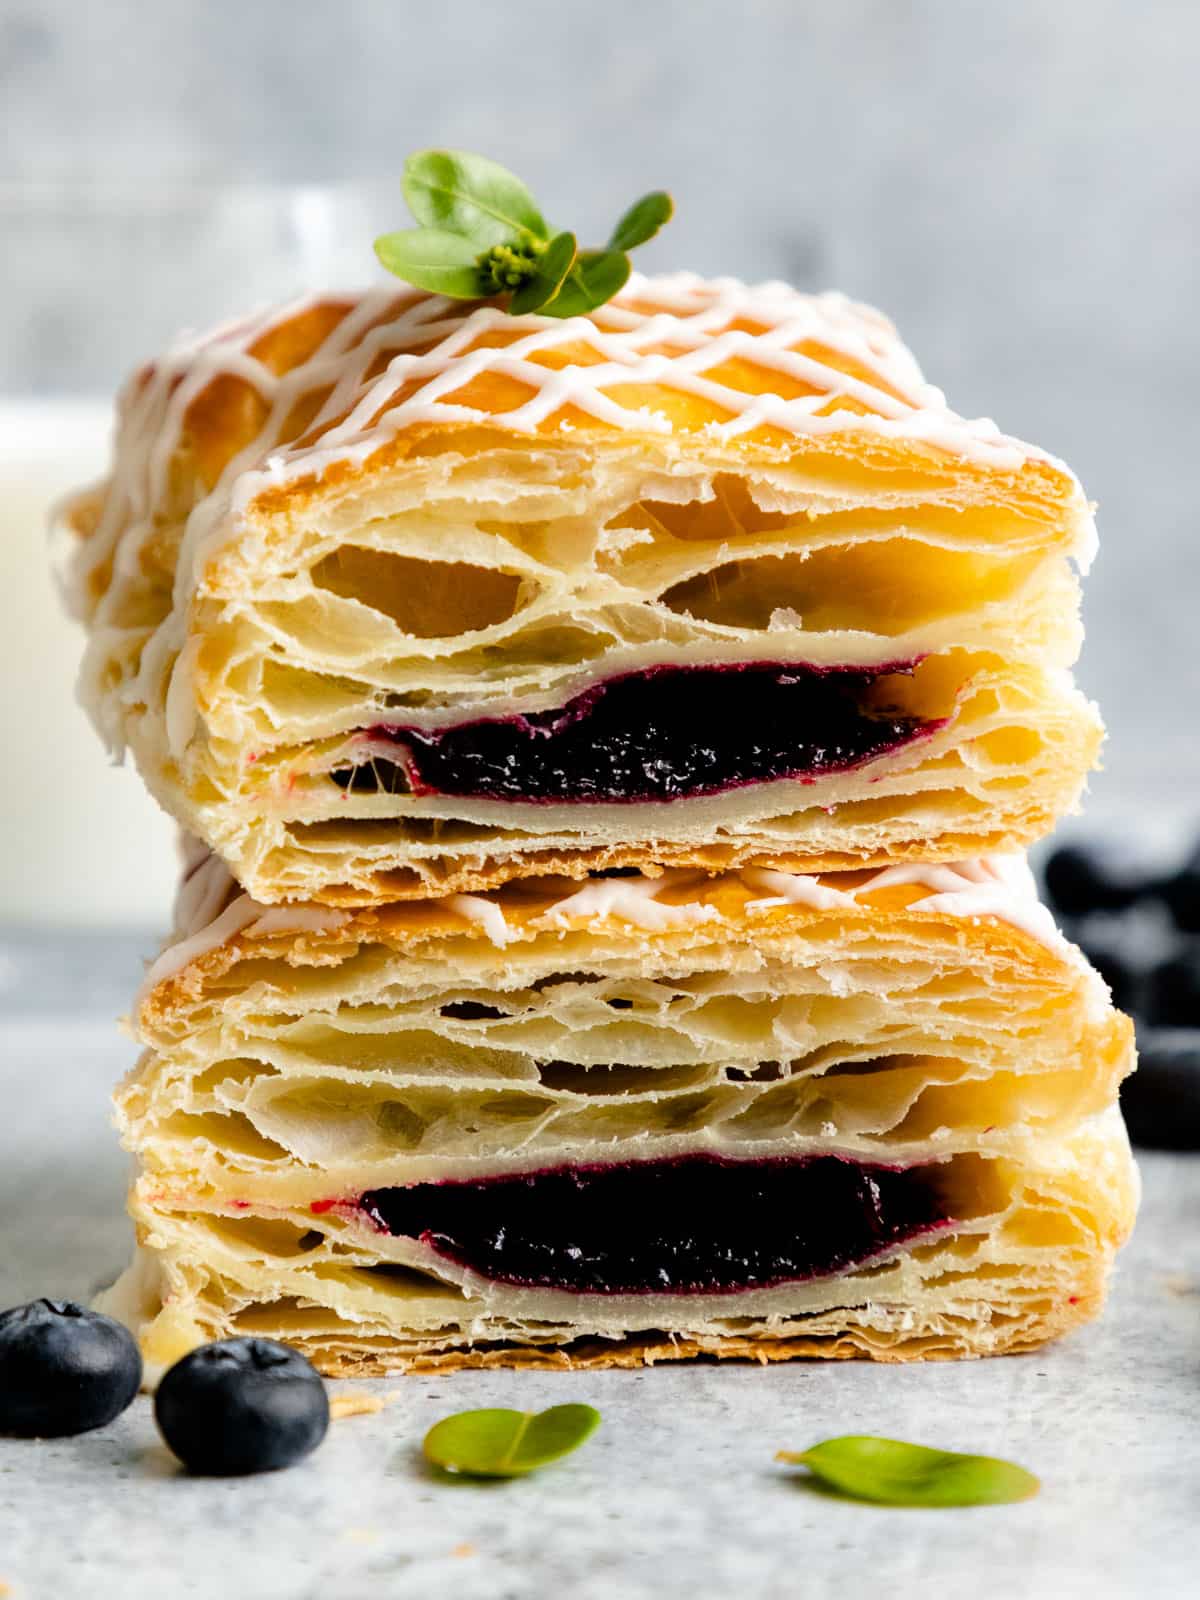 These Homemade Jam Filled Toaster Strudels are like mini flaky pies filled with homemade blackberry jam and topped with sweet vanilla glaze. #puffpastry #toasterstrudel #olgainthekitchen #pepperidgefarm #pie #pastry #jam #dessert #breakfast